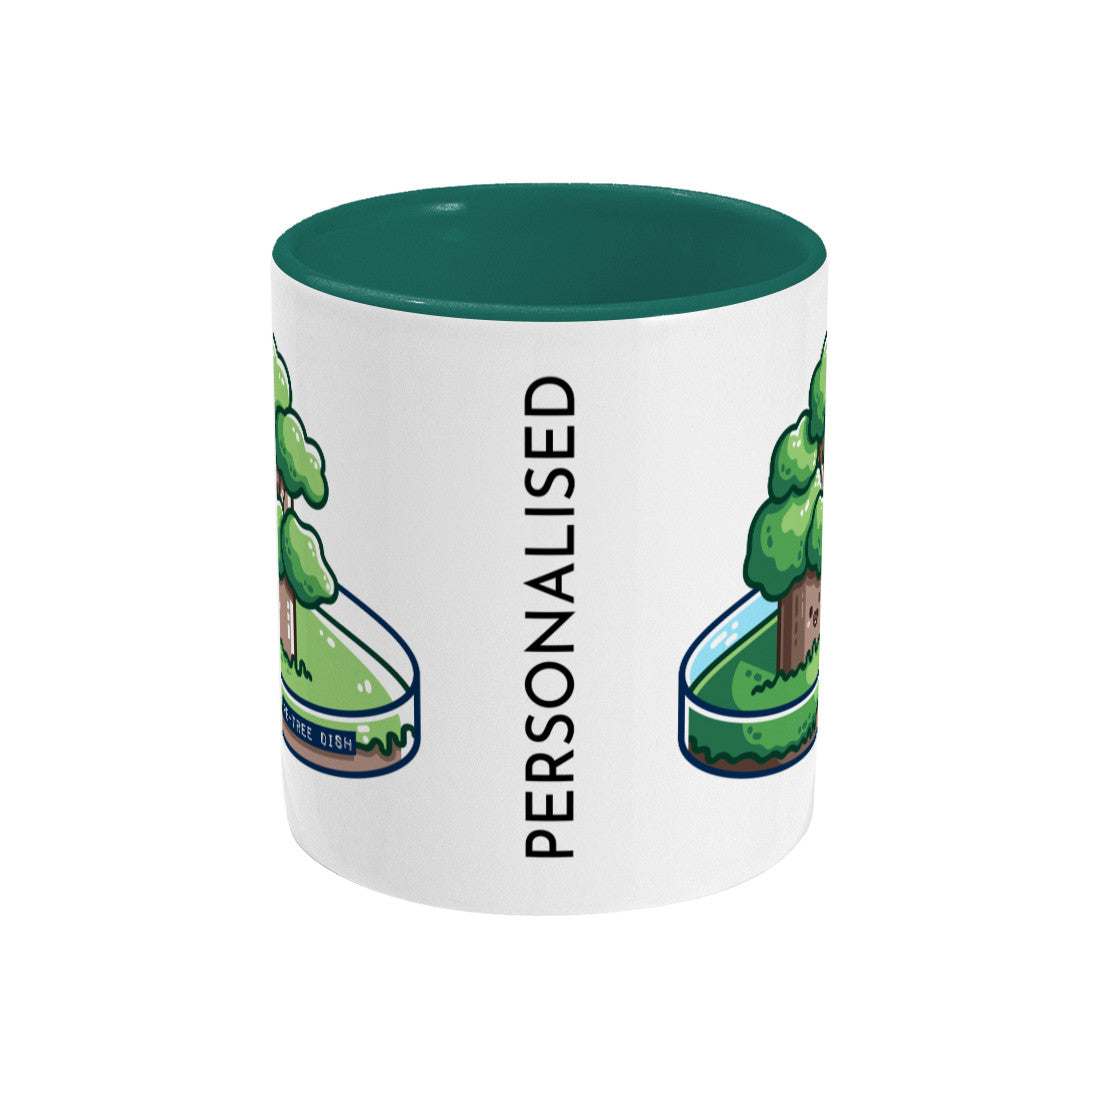 A two toned white and dark green ceramic mug seen side on with the handle hidden behind and a portion of the design visible at each edge of the mug with the word personalised printed between them.